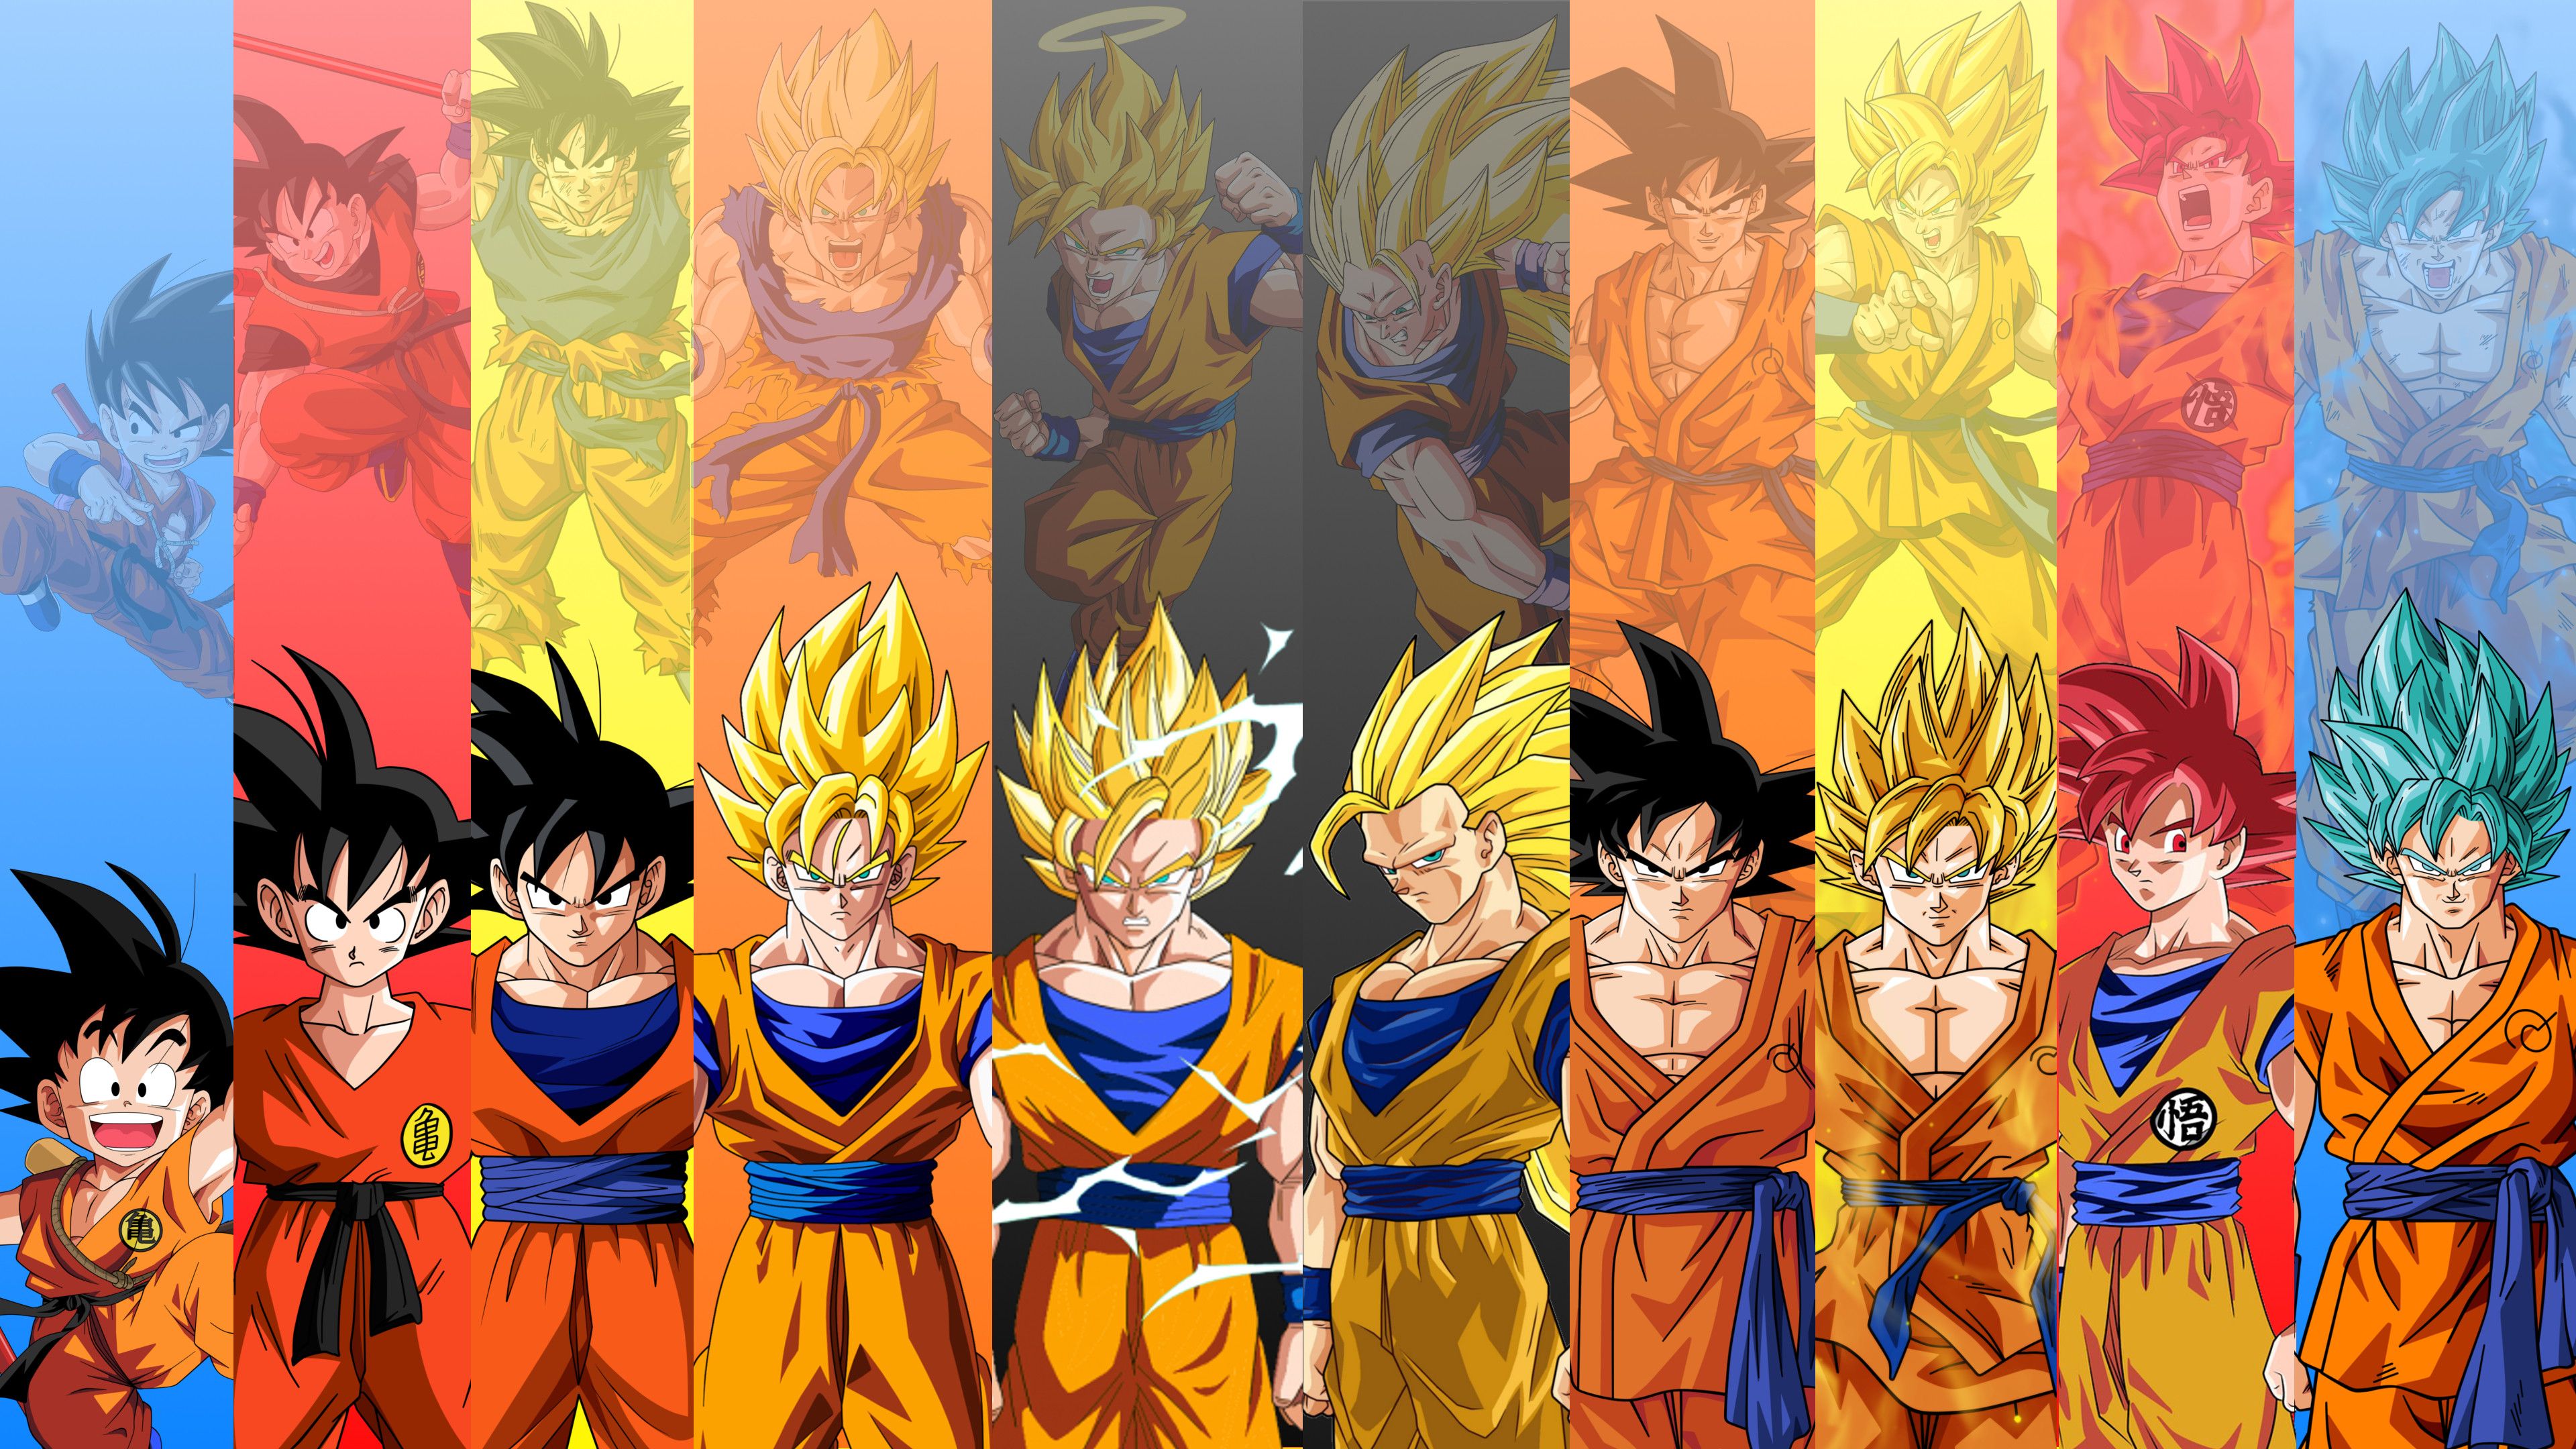 Just made this 4K Wallpaper featuring 10 Forms of Goku from DB, DBZ